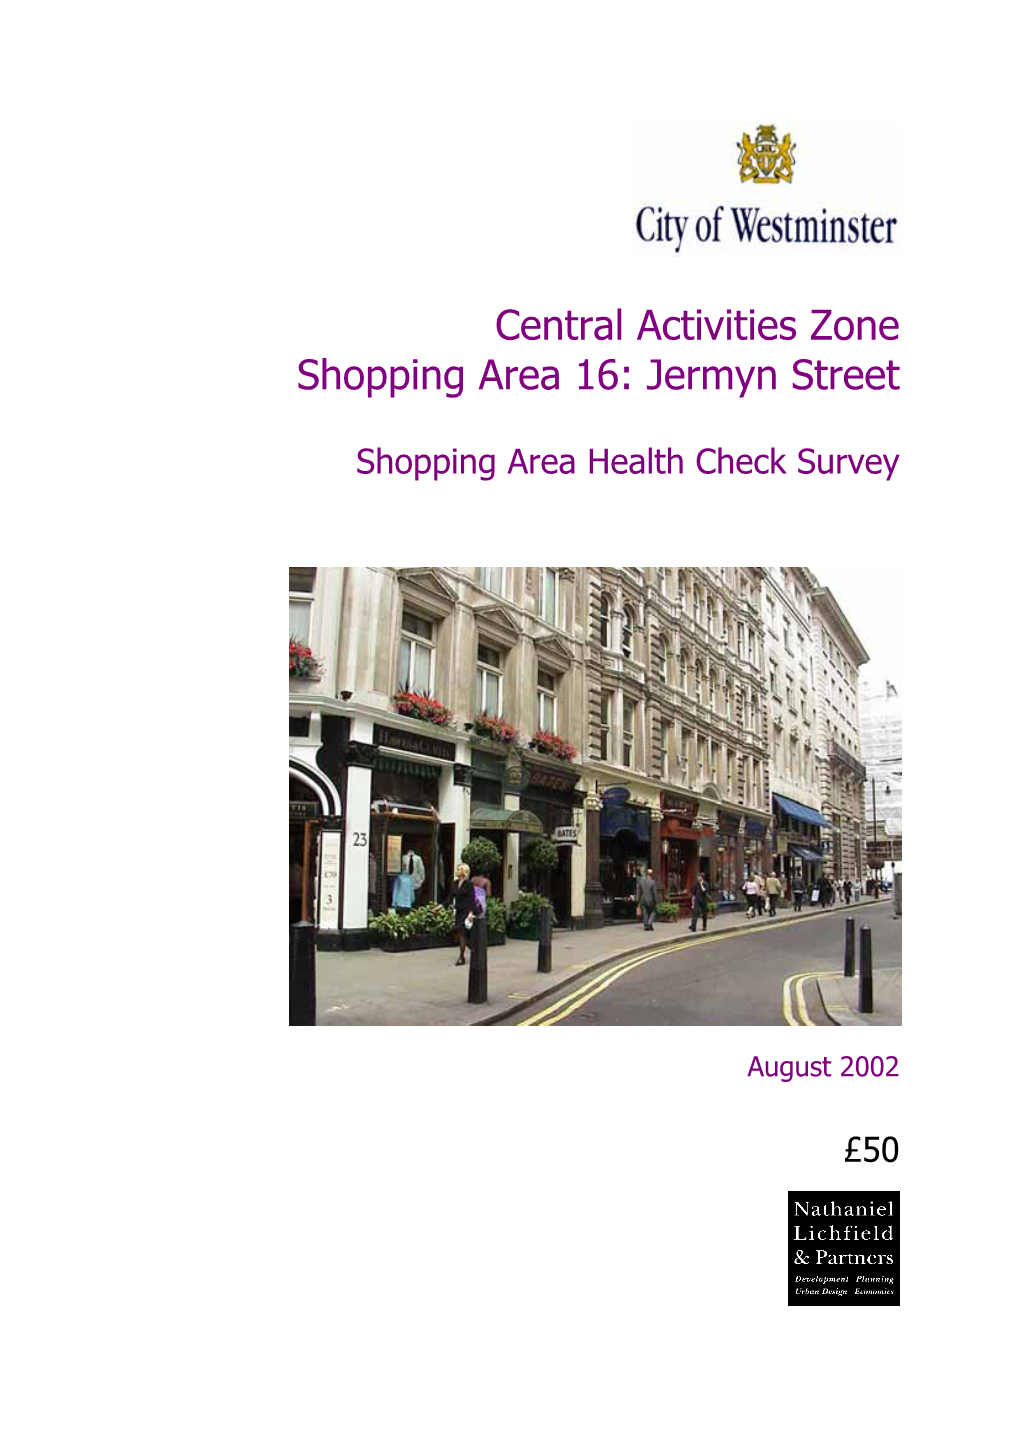 Central Activities Zone Shopping Area 16: Jermyn Street